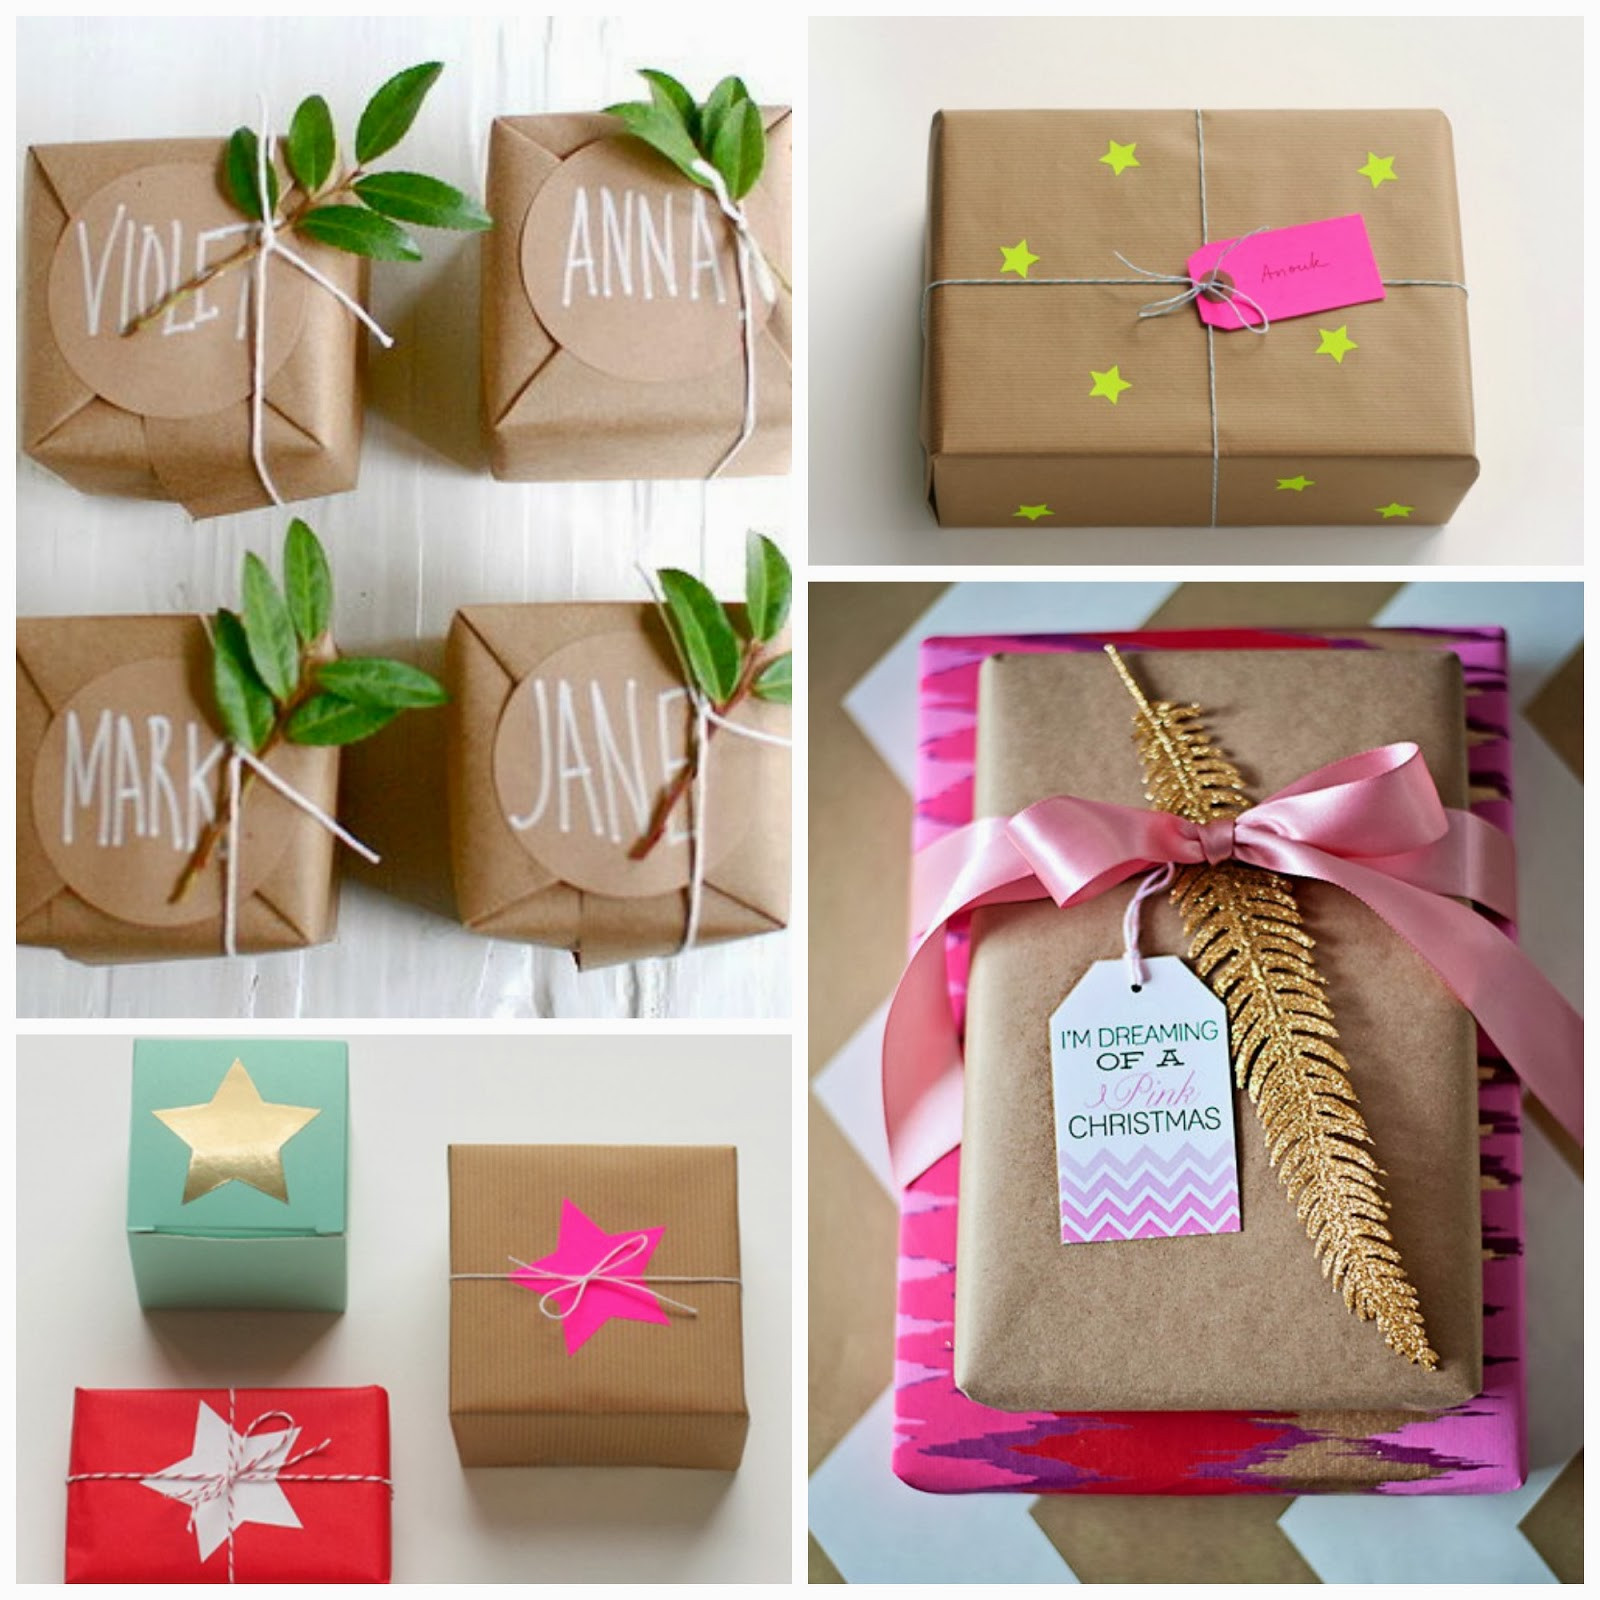 Christmas Gift Ideas On Pinterest
 honey and fizz Christmas Gift Wrapping Ideas